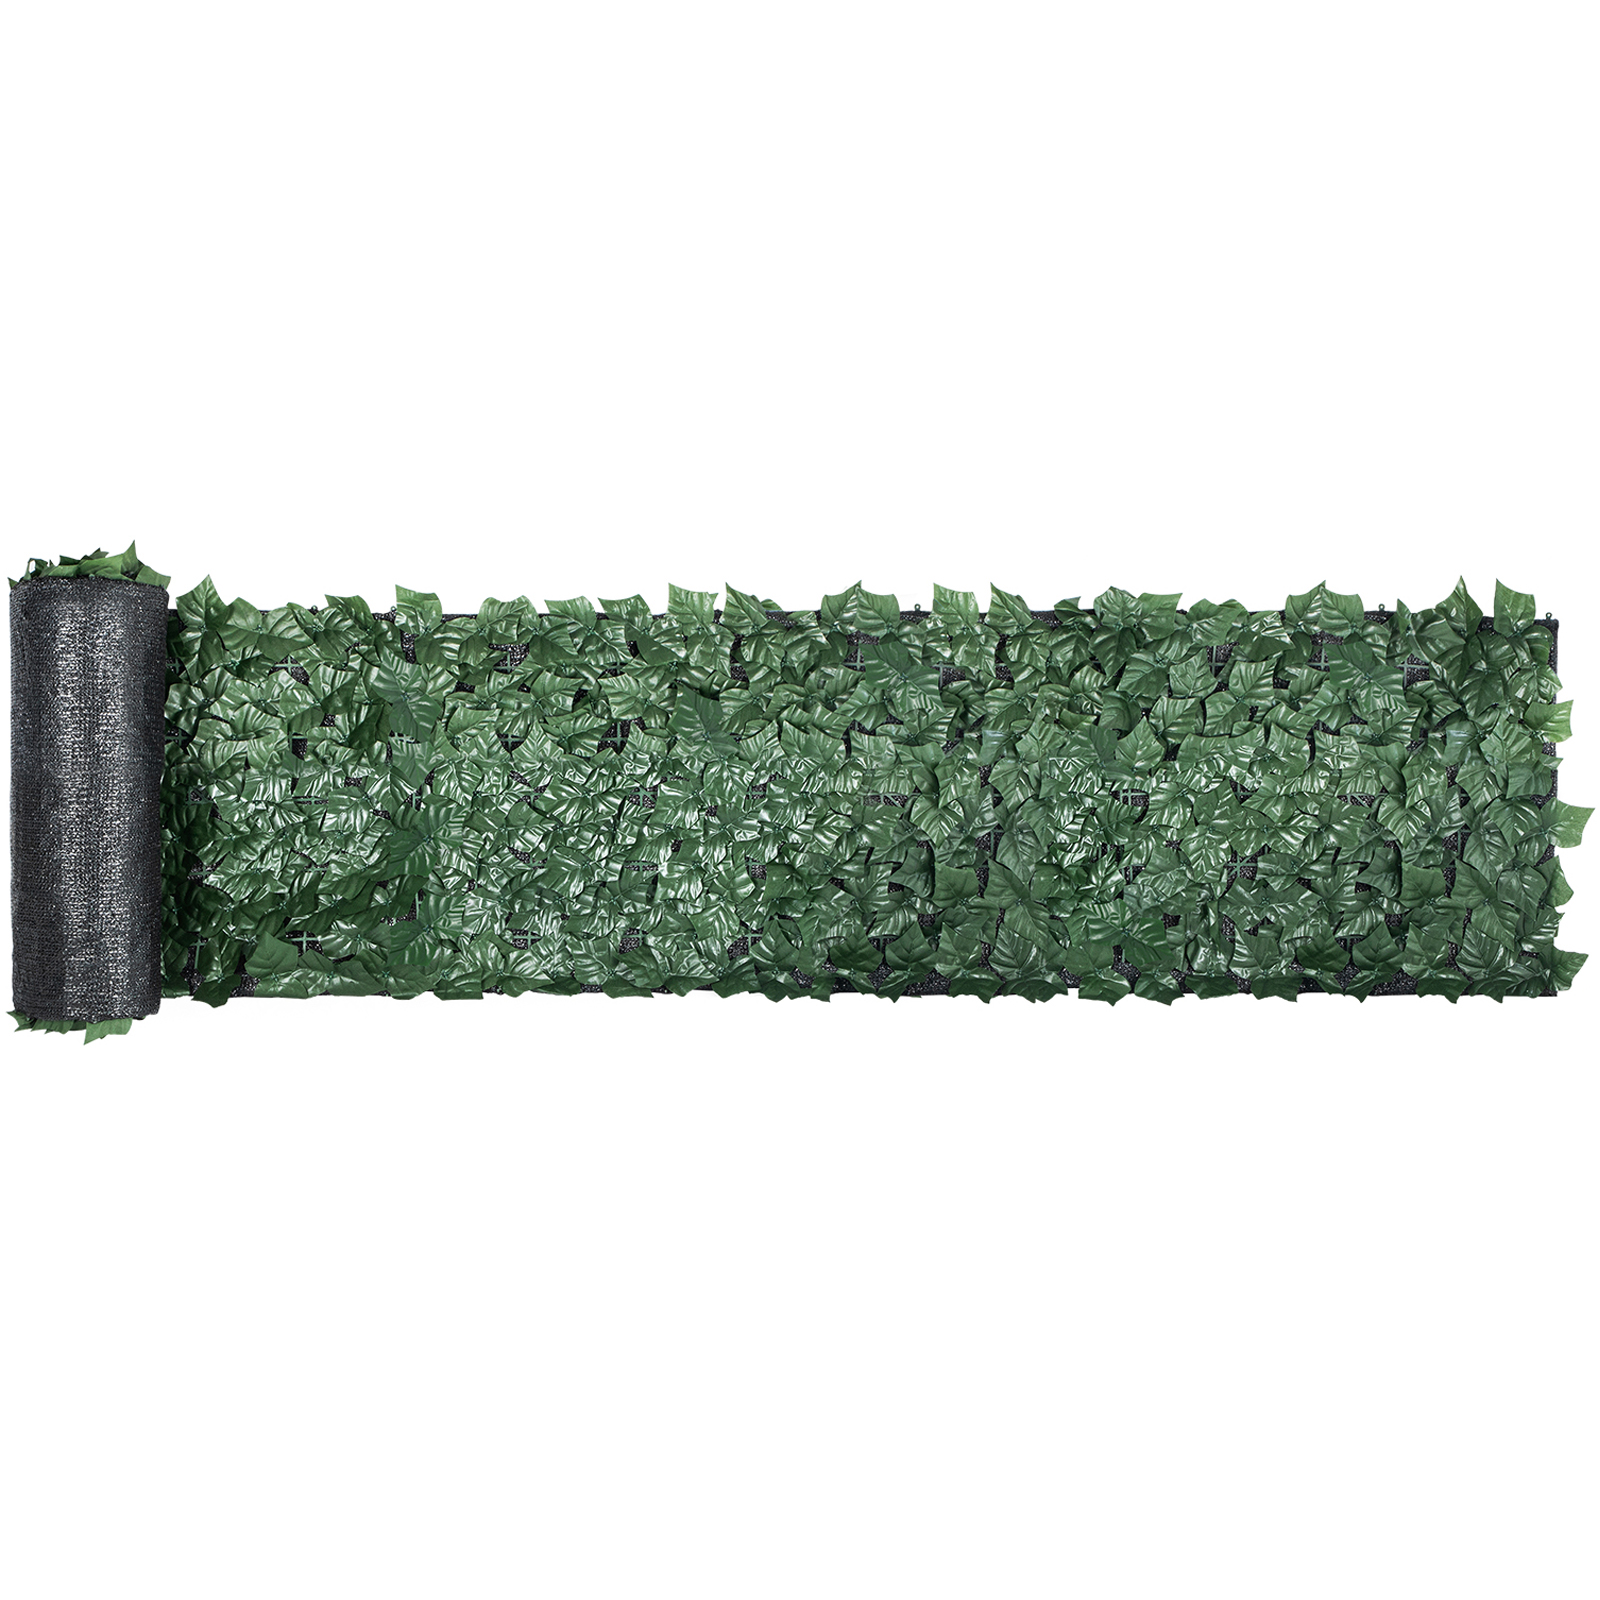 VEVOR 39"x158" Faux Ivy Leaf Artificial Hedge Privacy Fence Screen Decorative от Vevor Many GEOs